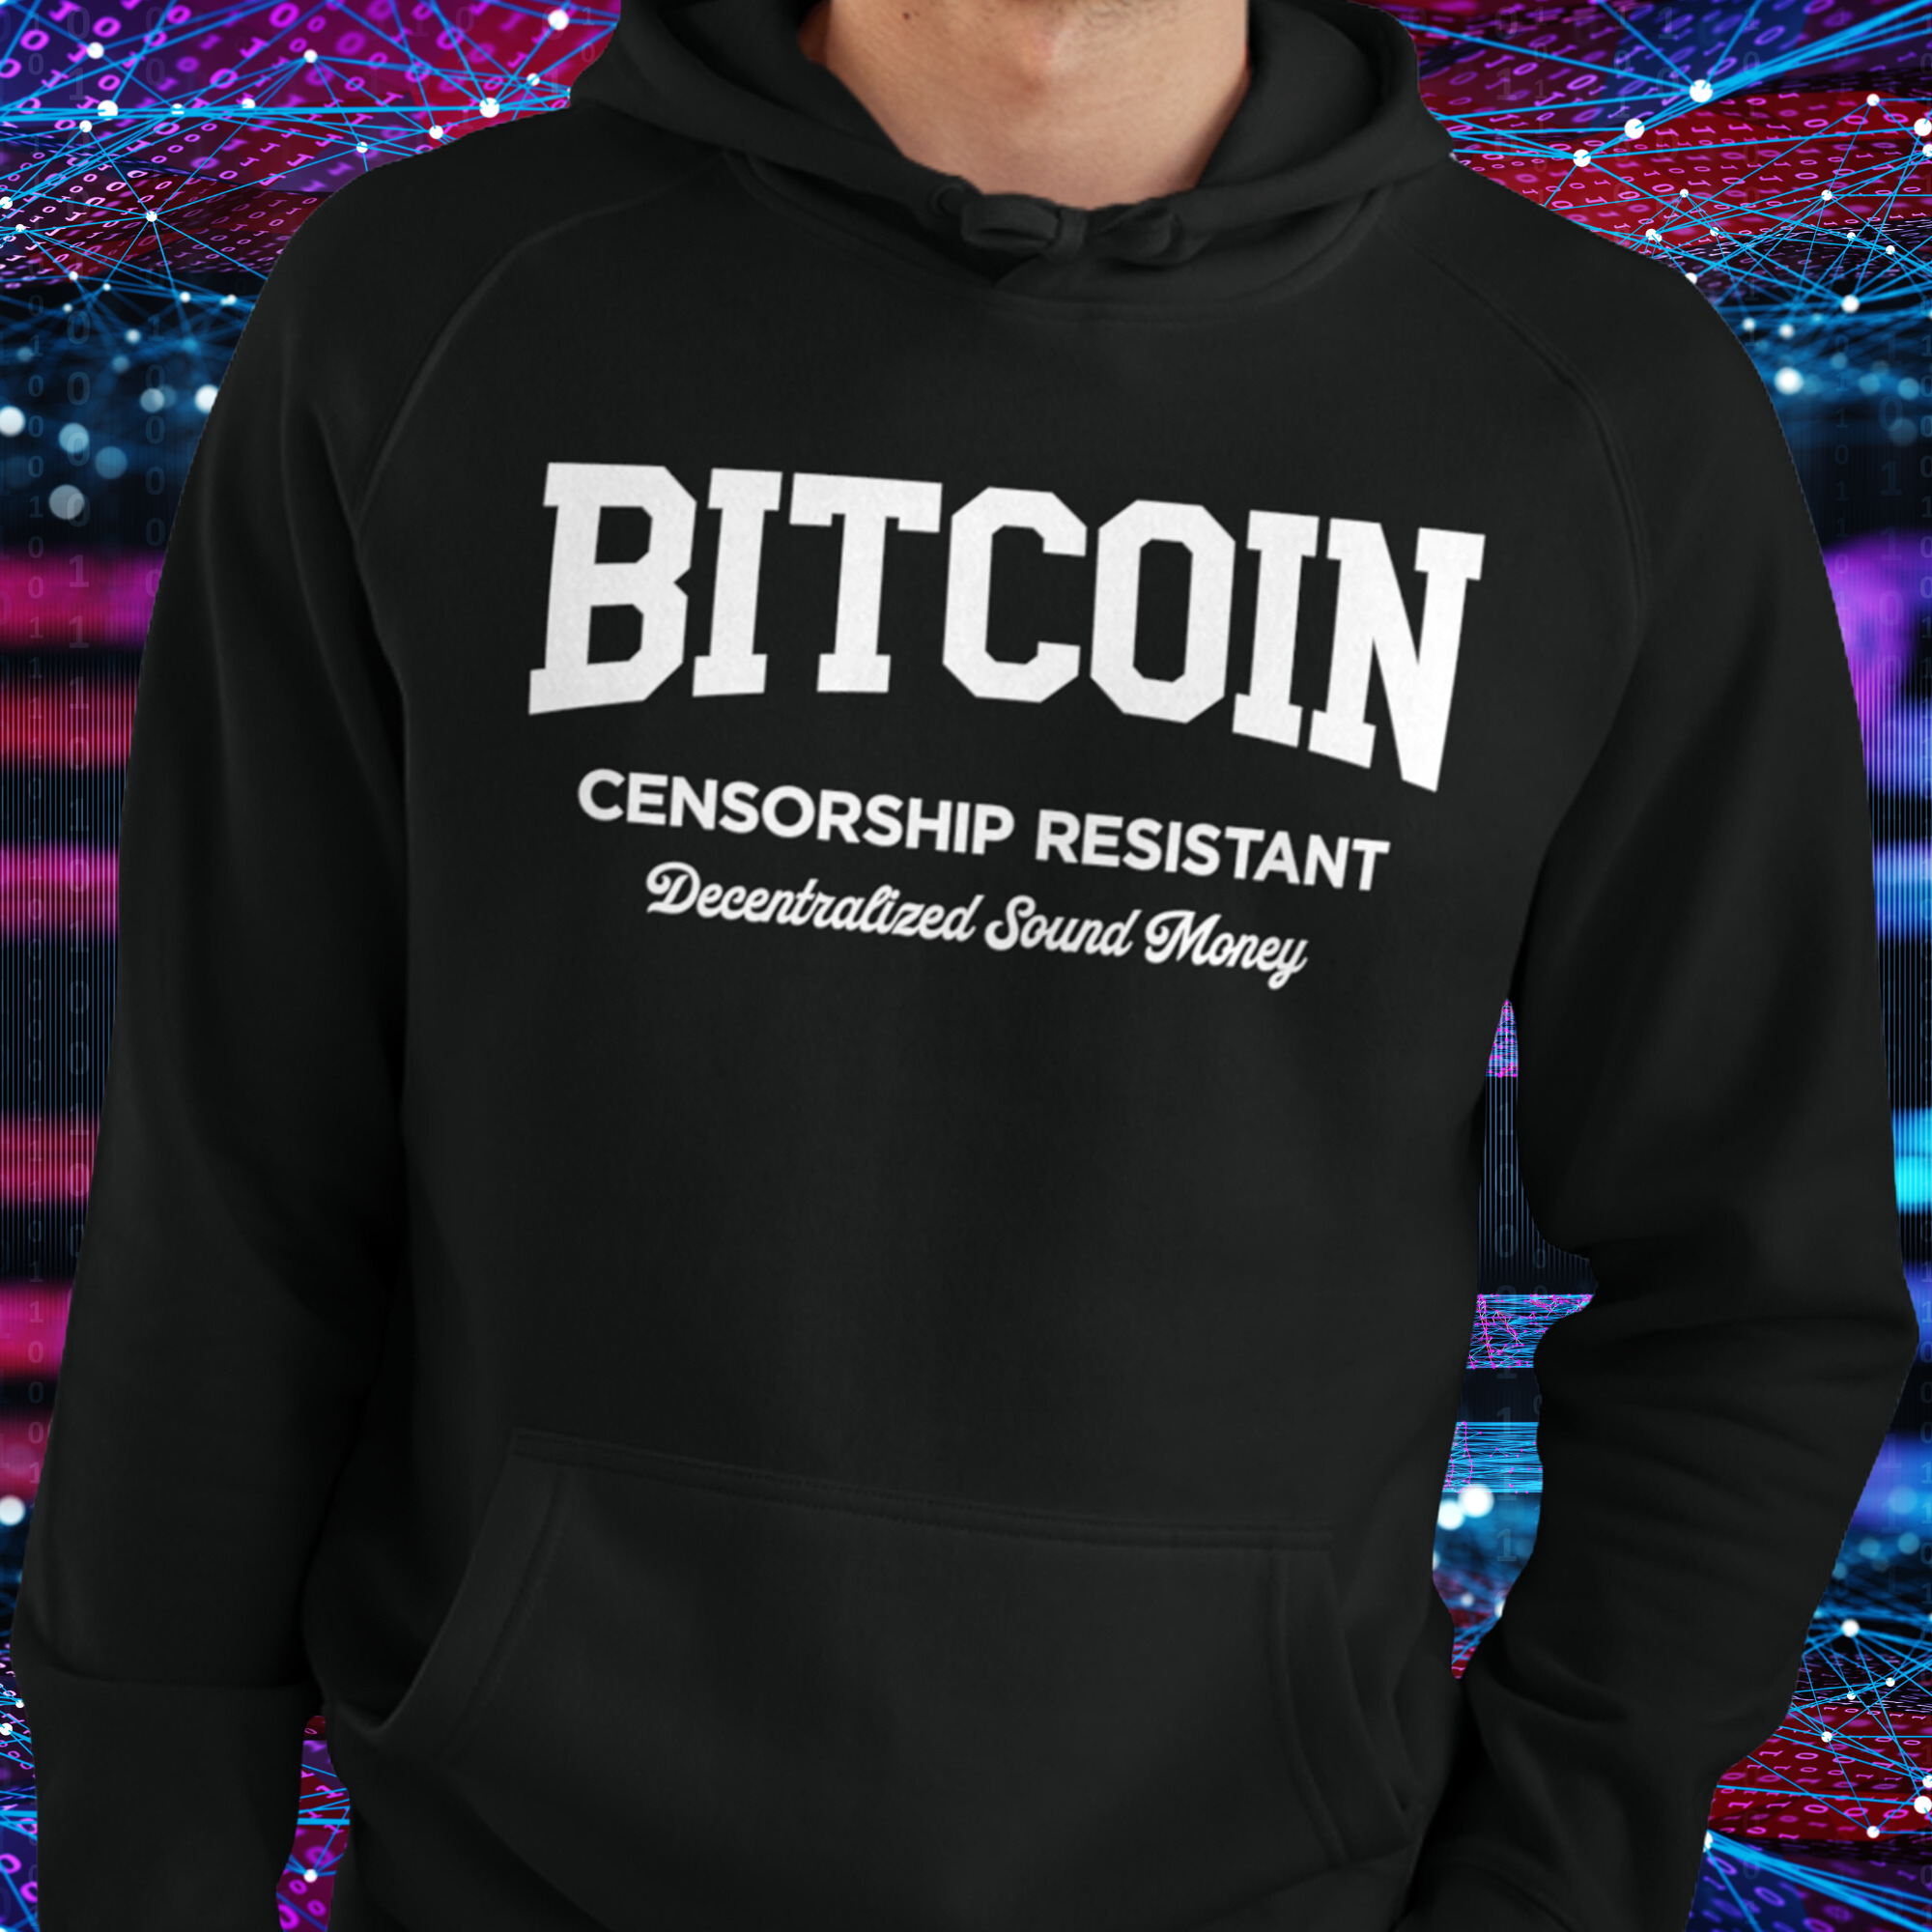 Bitcoin Apparel - Bitcoin Censorship Resistant Hoodie worn by a male model. Front view.